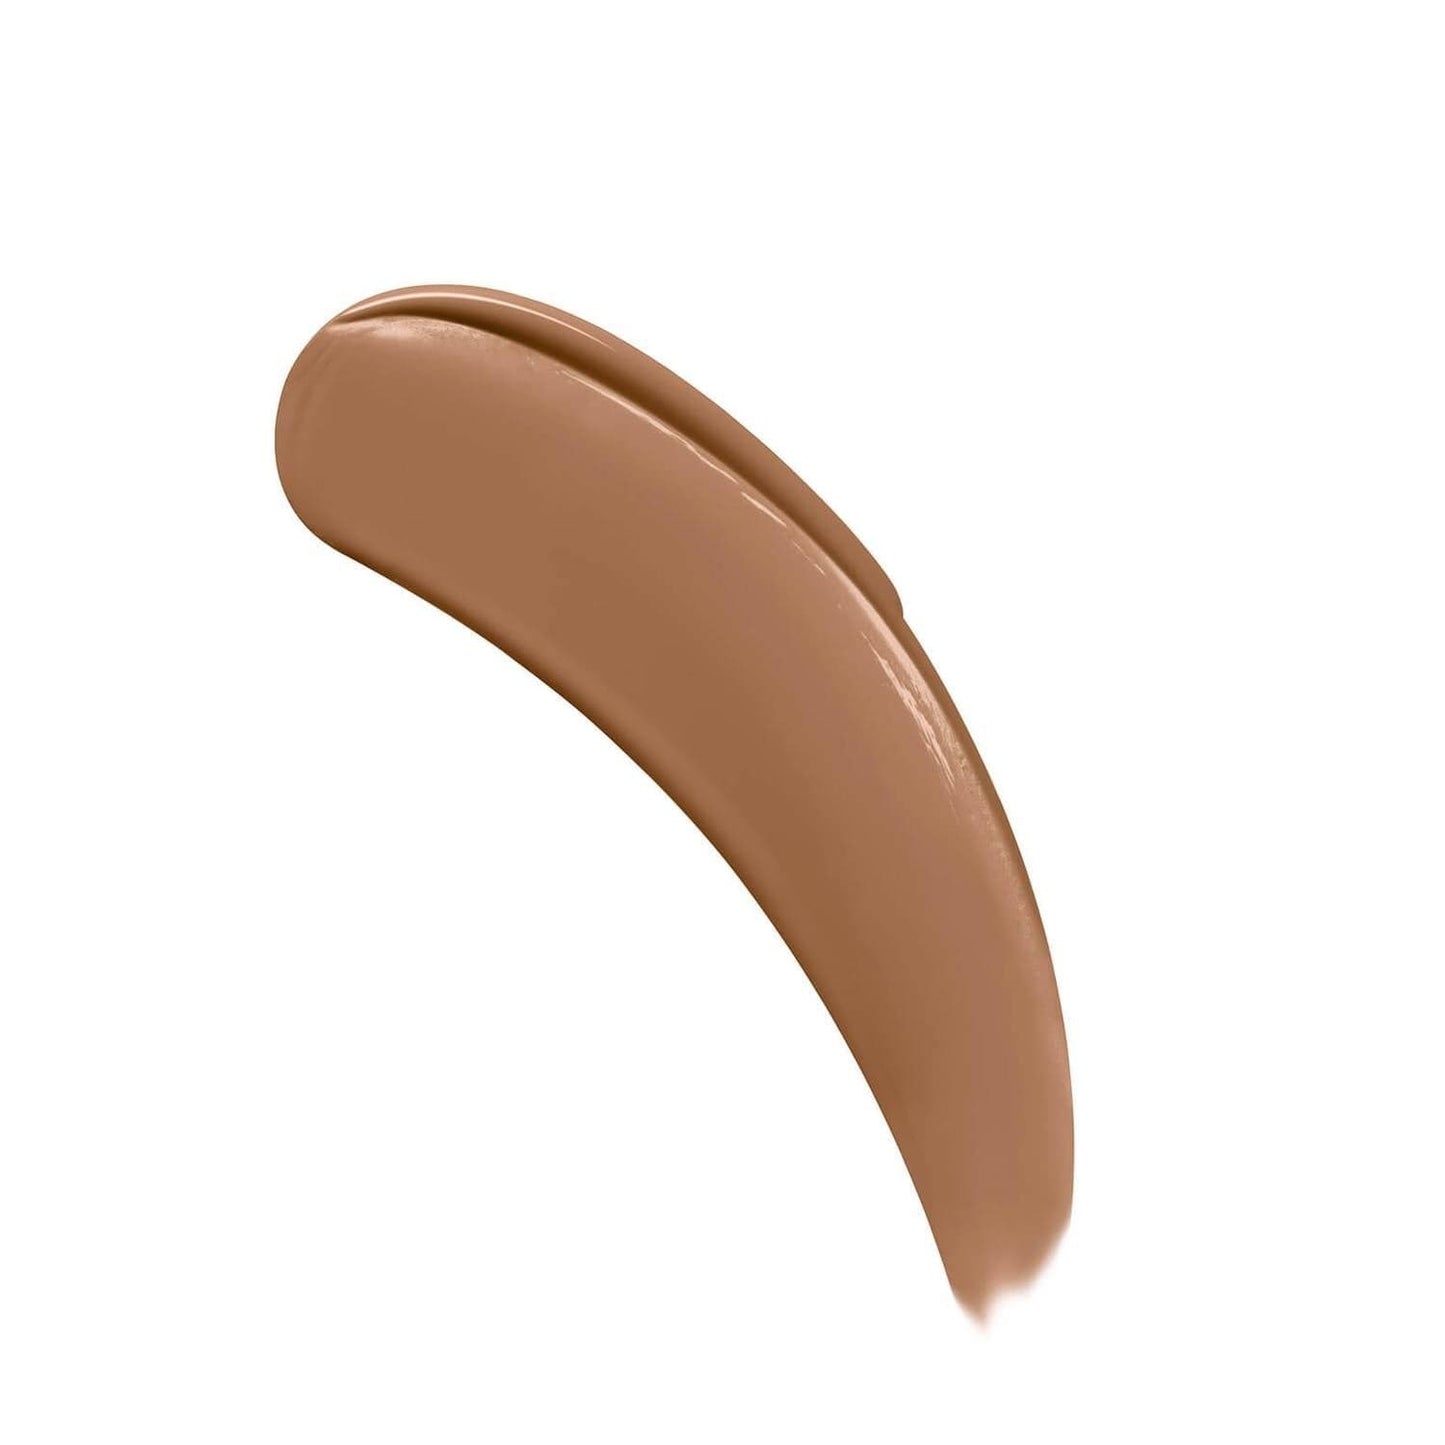 IT COSMETICS Beauty IT Cosmetics Your Skin But Better Foundation and Skincare 30ml - 51.25 Rich Neutral